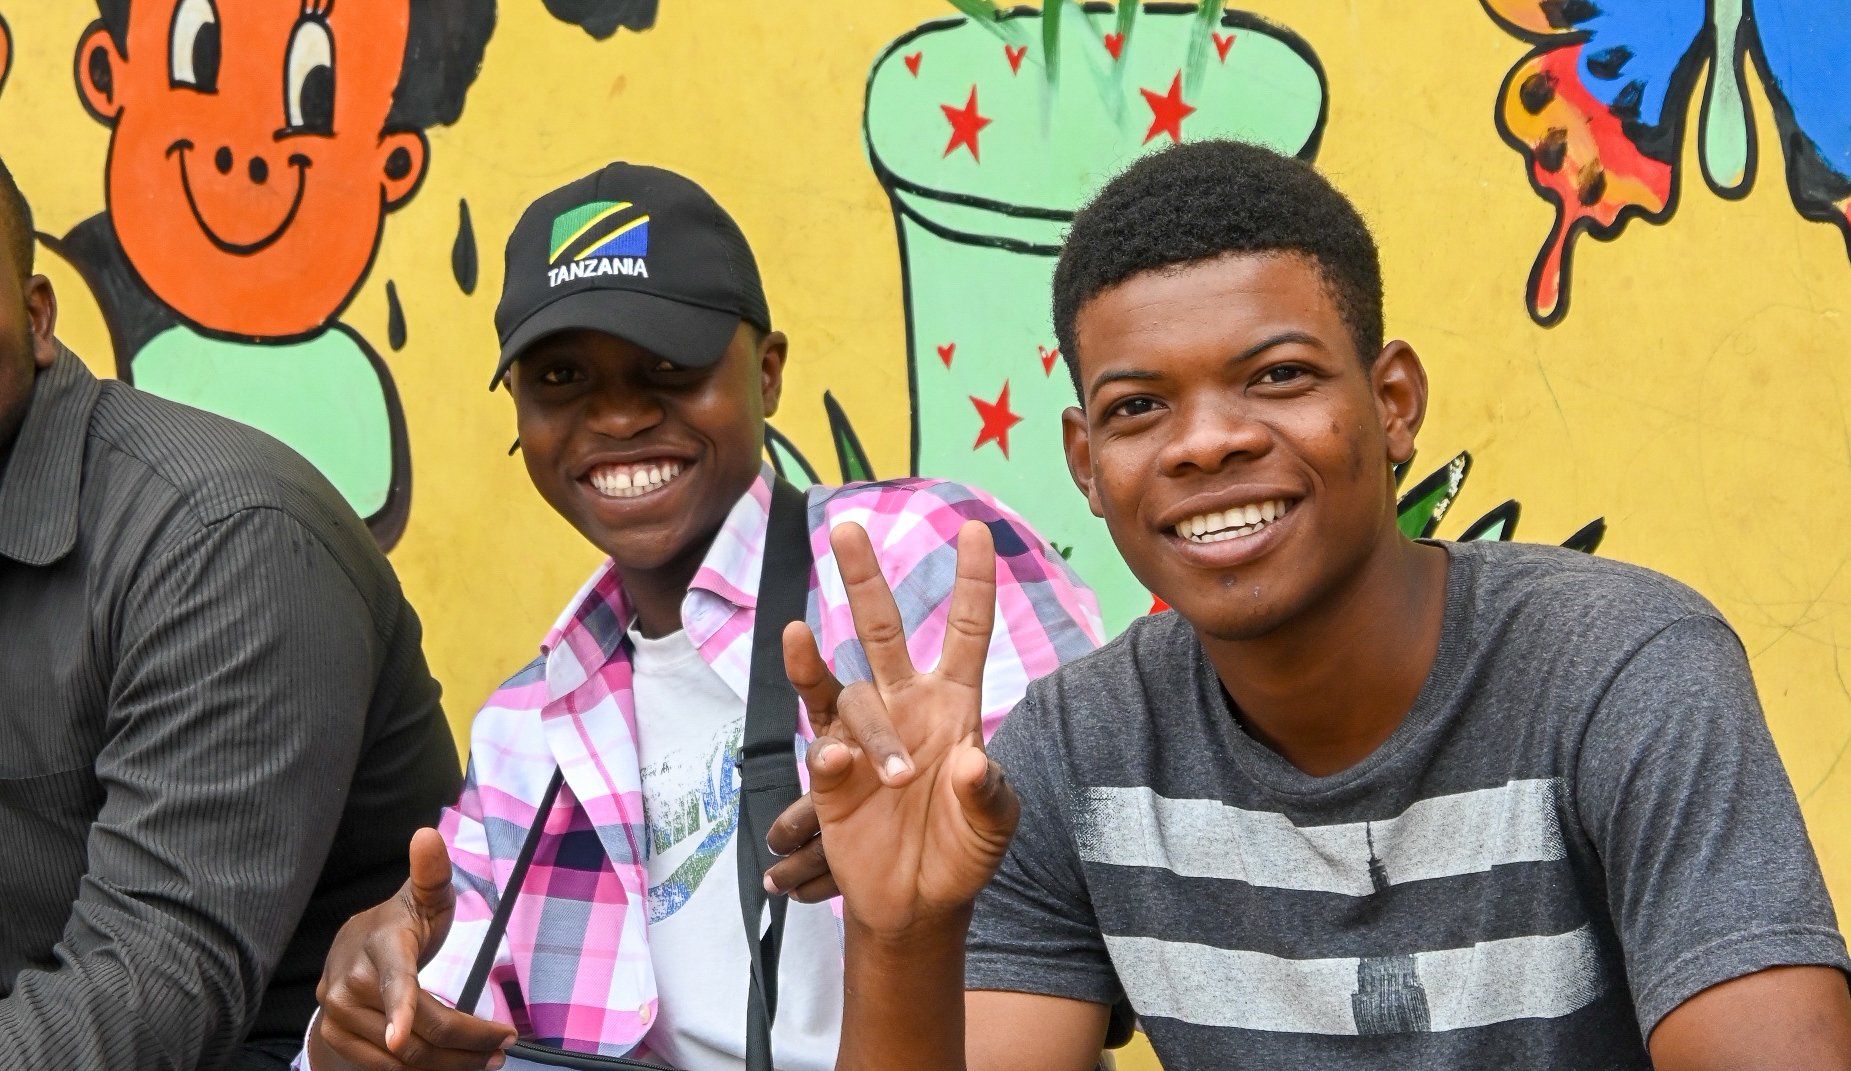 A group of young men are posing for a picture in front of a mural.